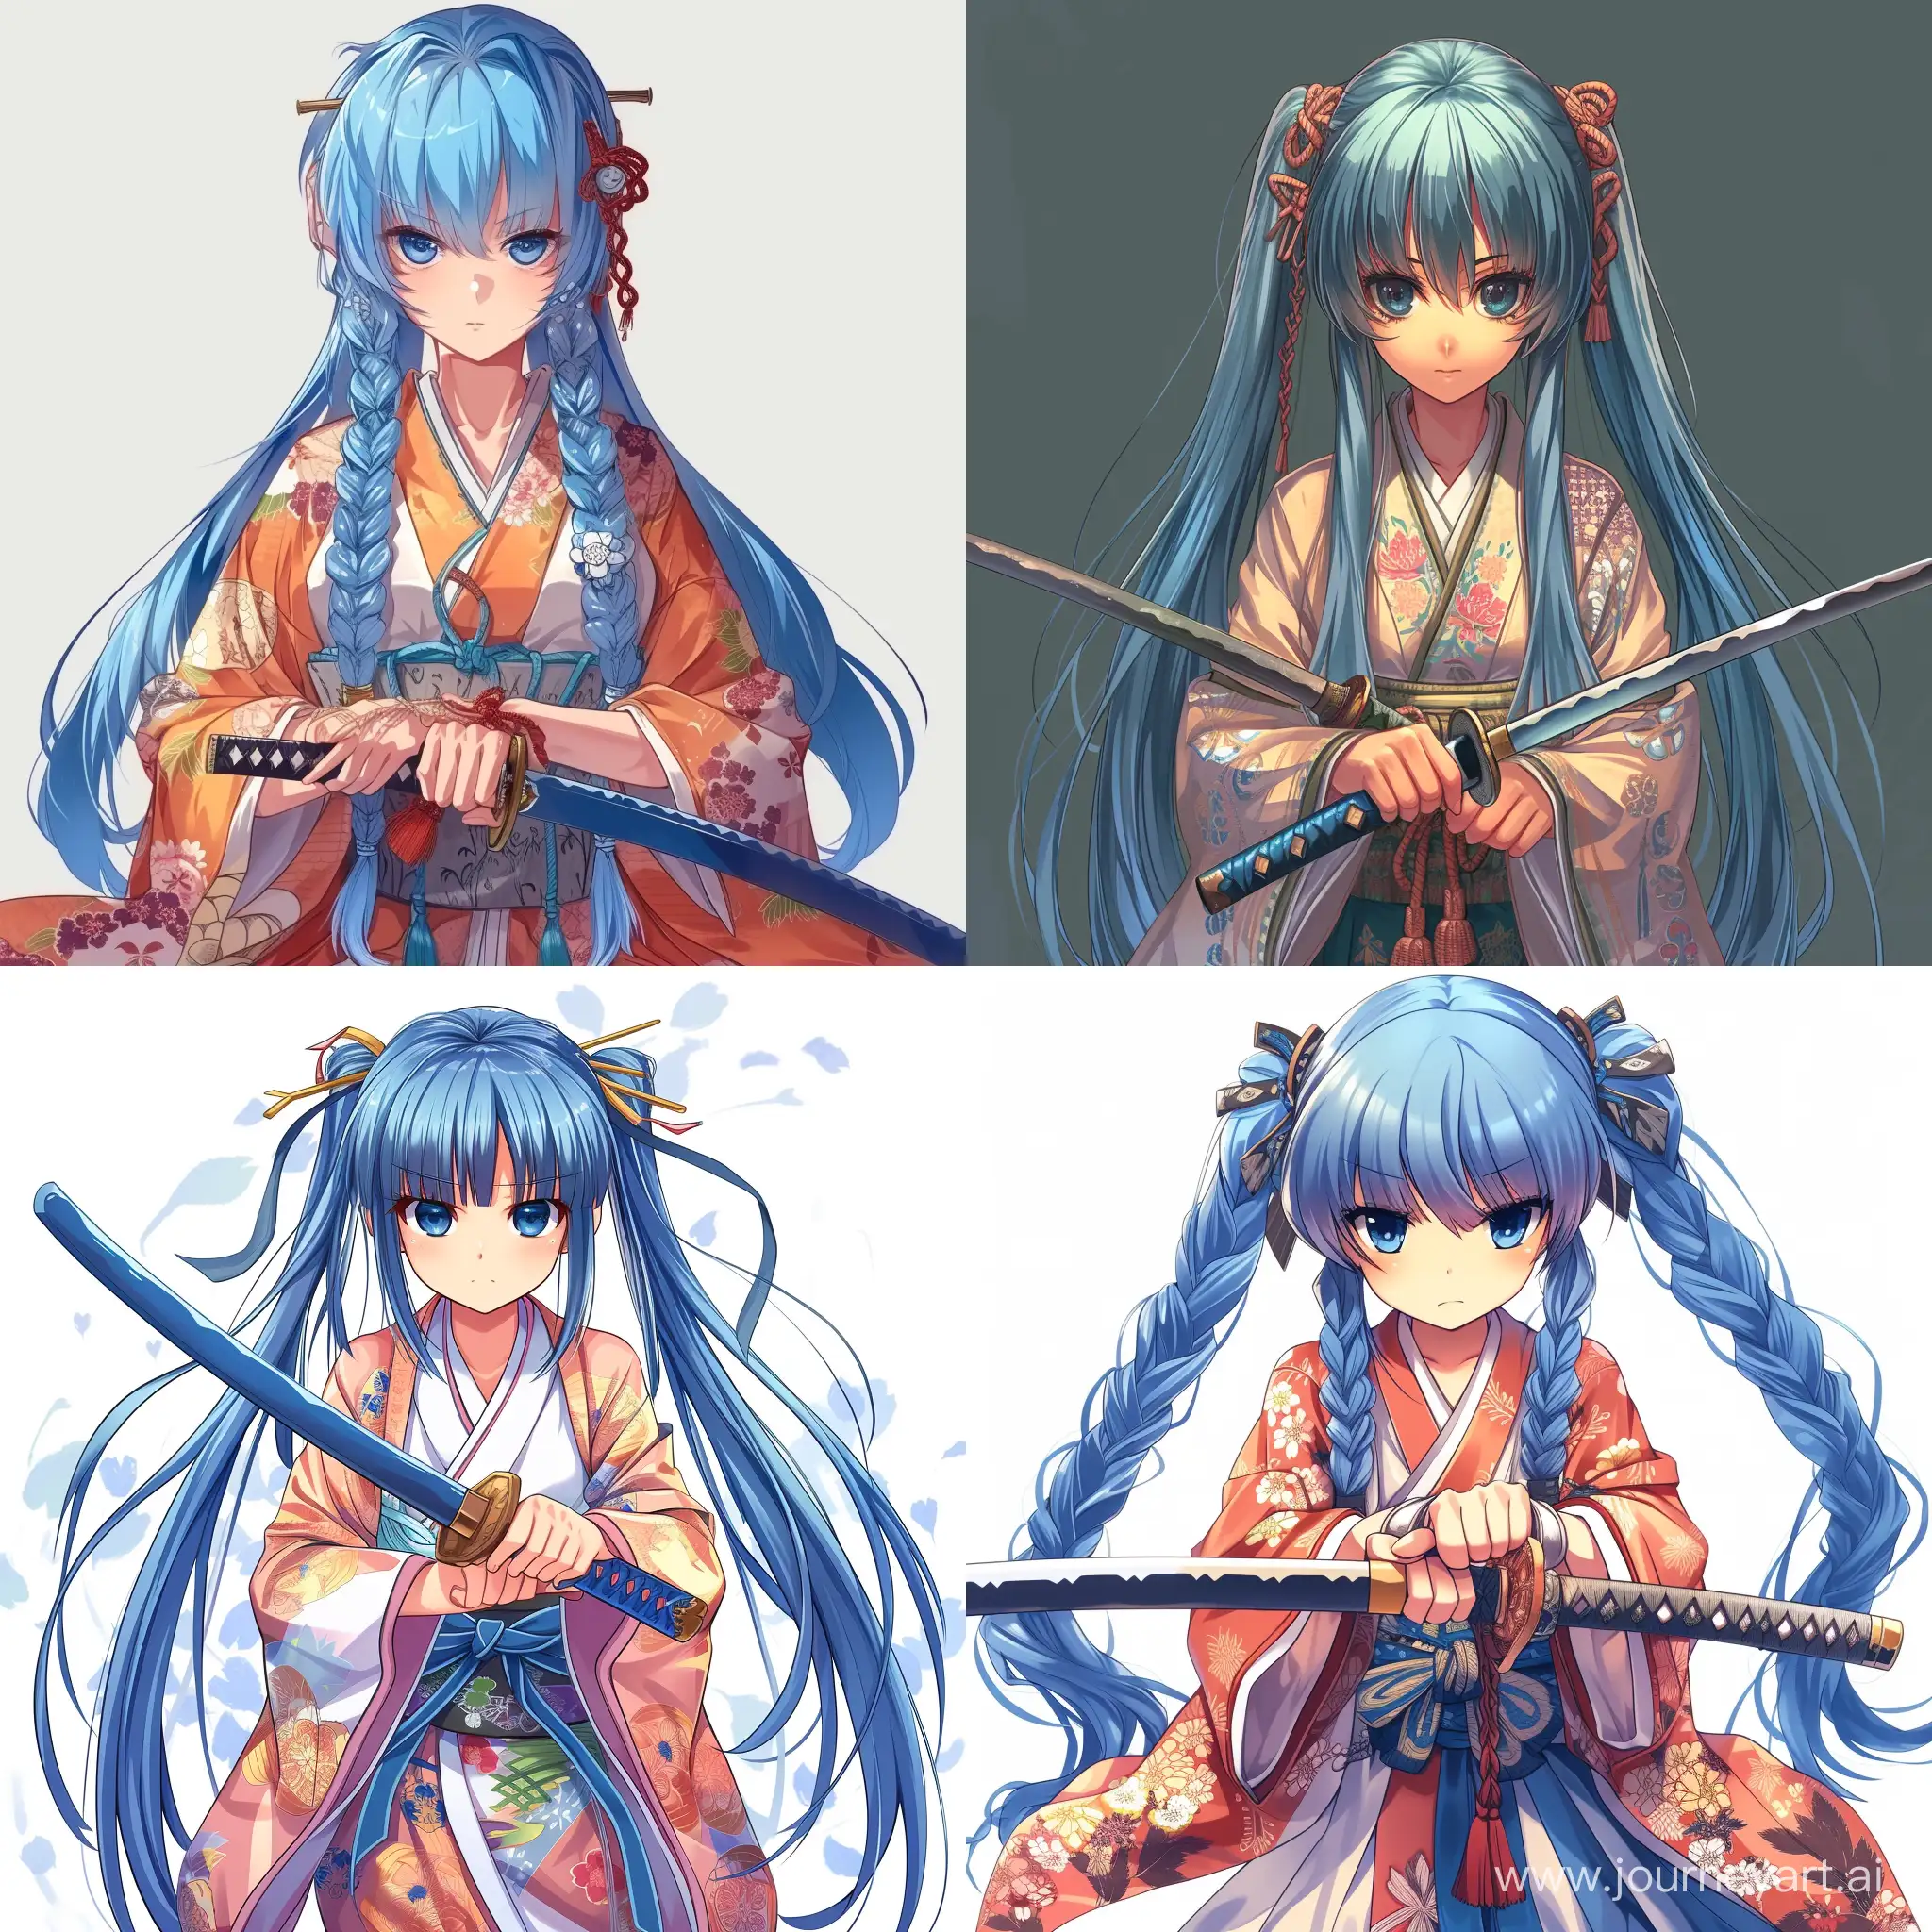 Elegant-Anime-Warrior-with-Blue-Long-Hair-Wielding-a-Katana-in-Traditional-Attire